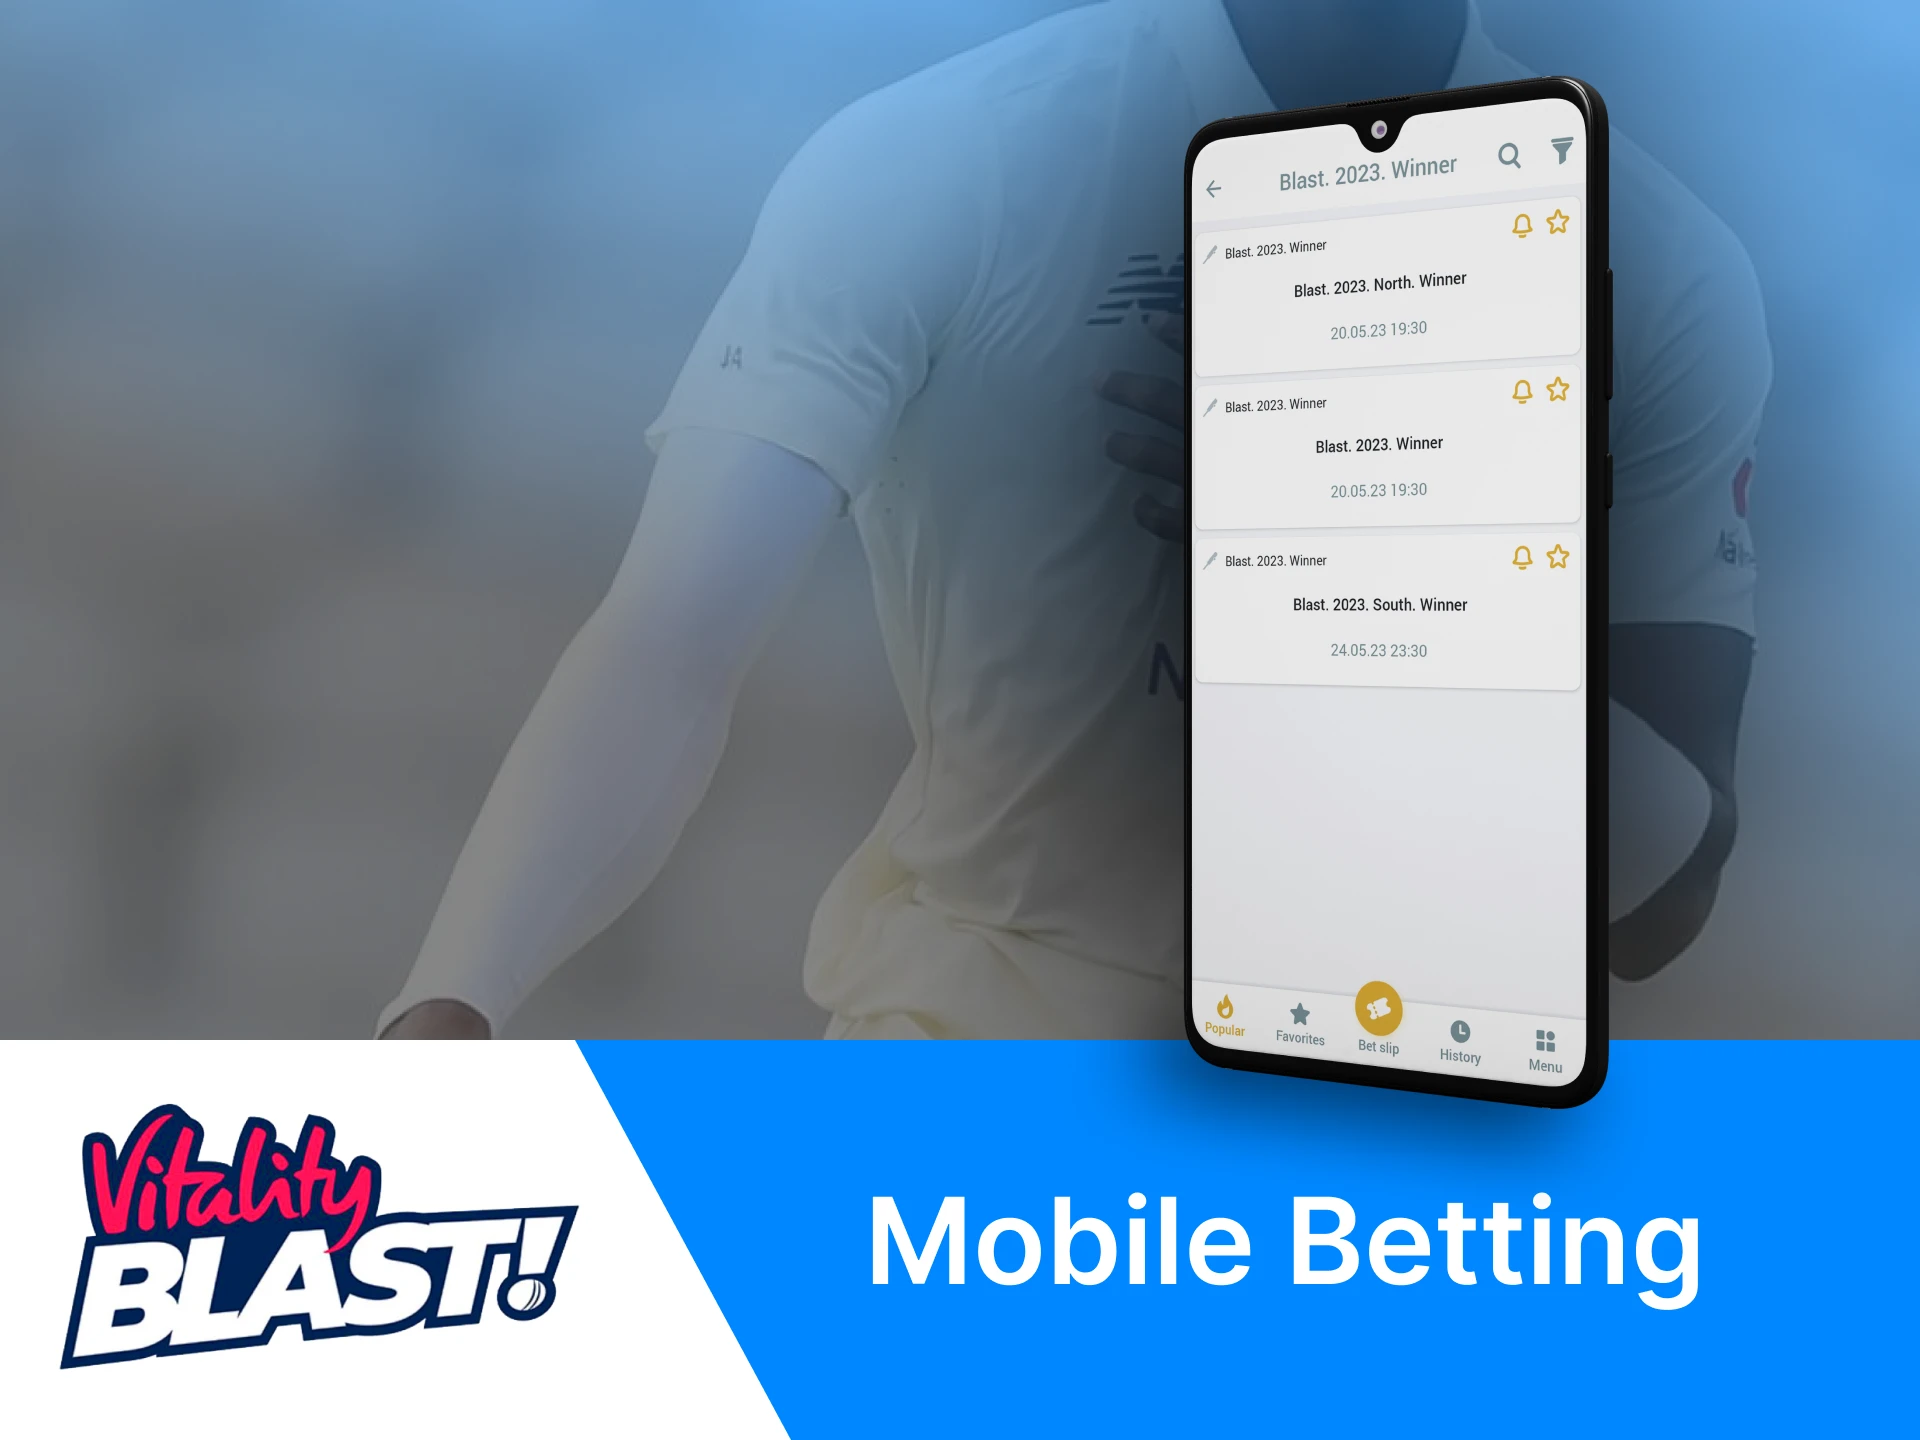 Most bookmakers provide placing bets on T20 Blast in their apps.